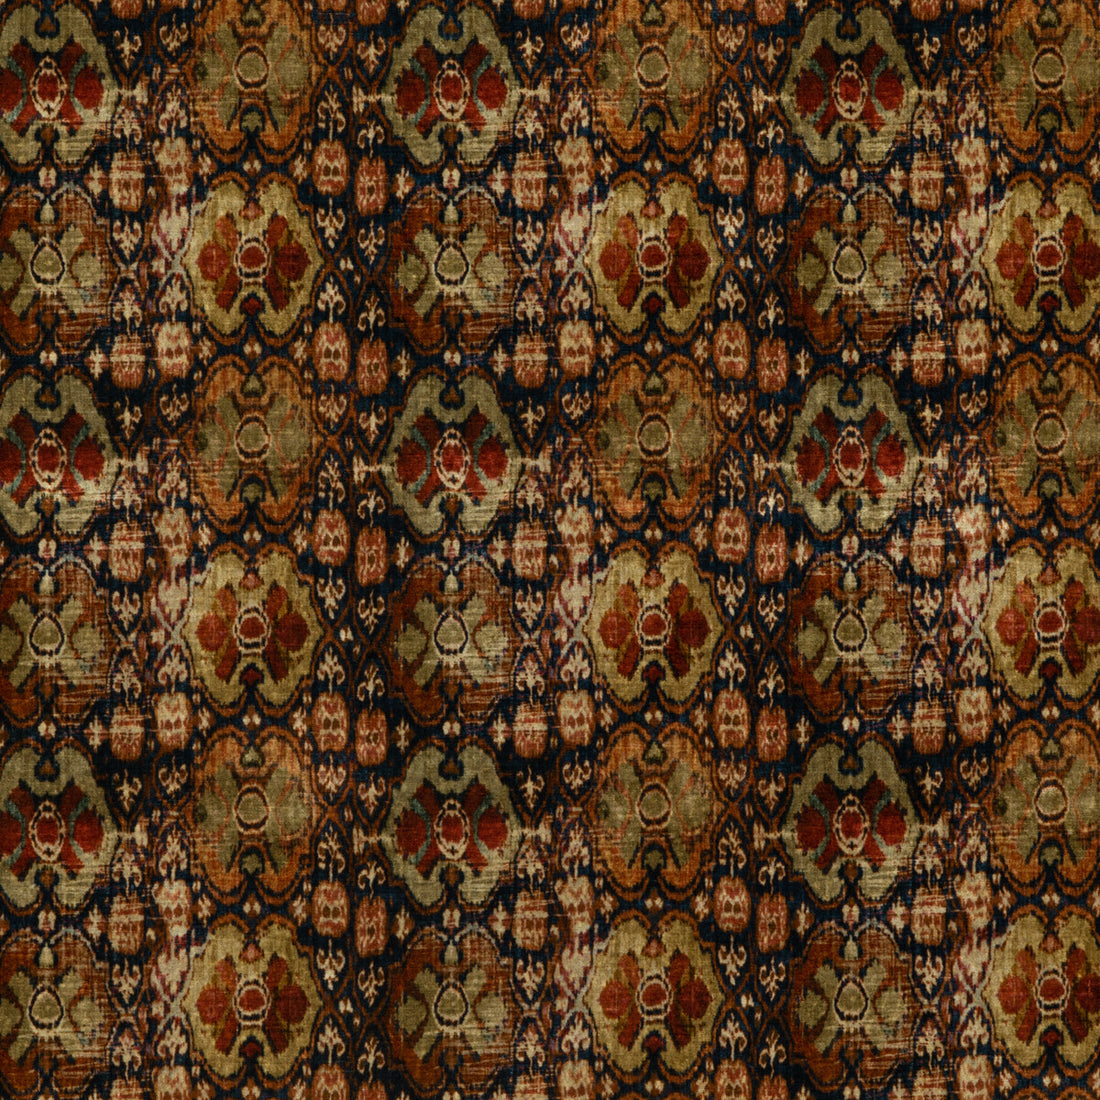 Petropolis fabric in sienna color - pattern BP10816.4.0 - by G P &amp; J Baker in the Signature Velvets collection